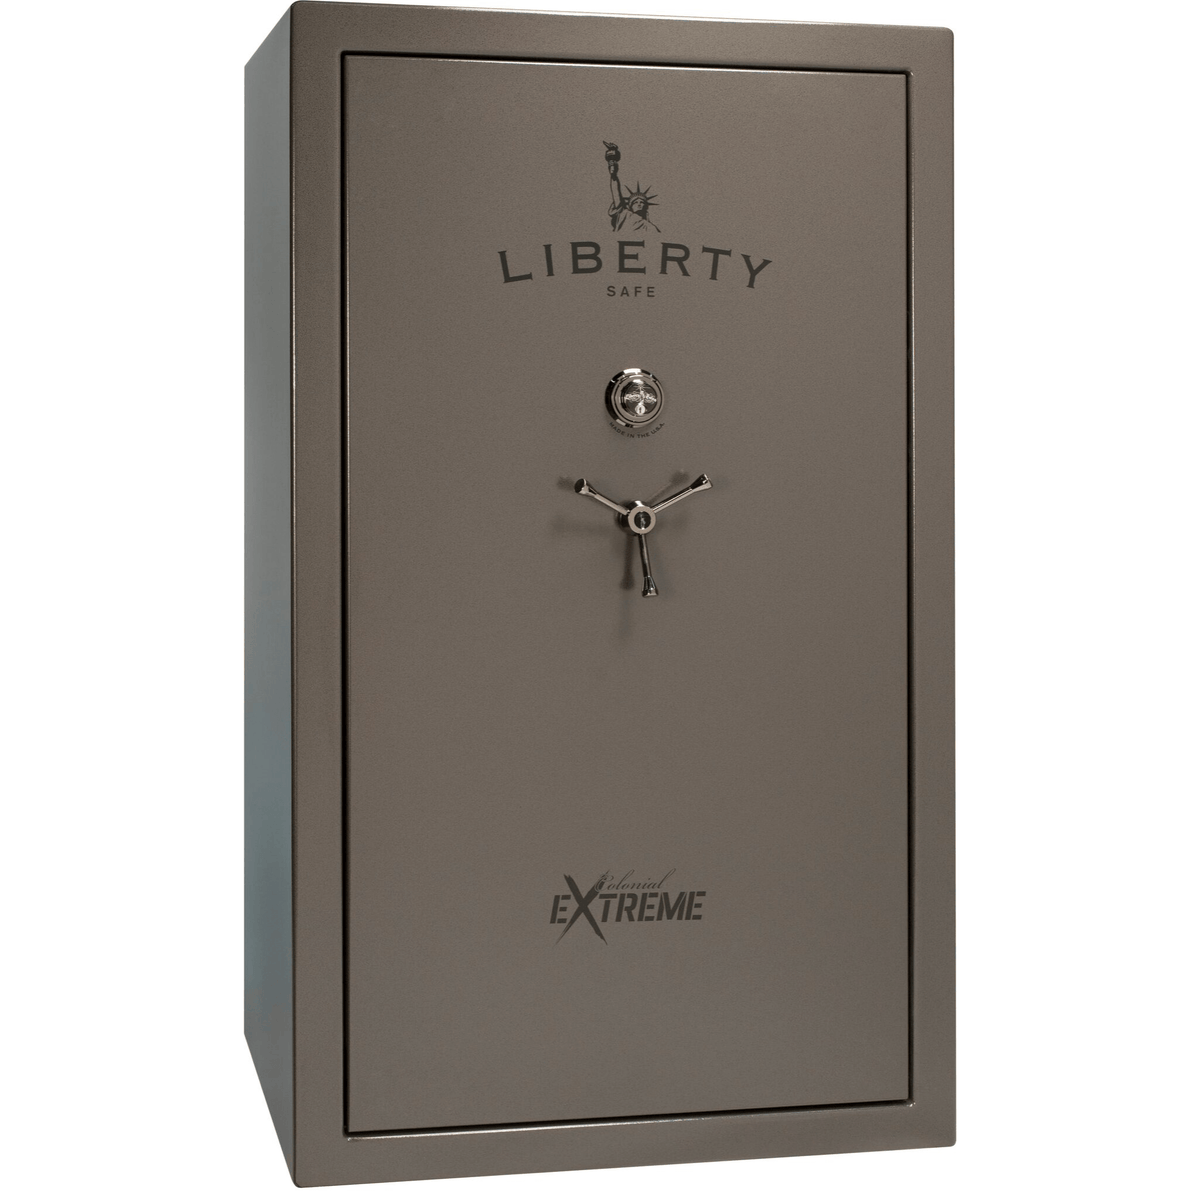 Liberty Colonial 50 Extreme Safe in Gray Marble with Black Chrome Mechanical Lock.